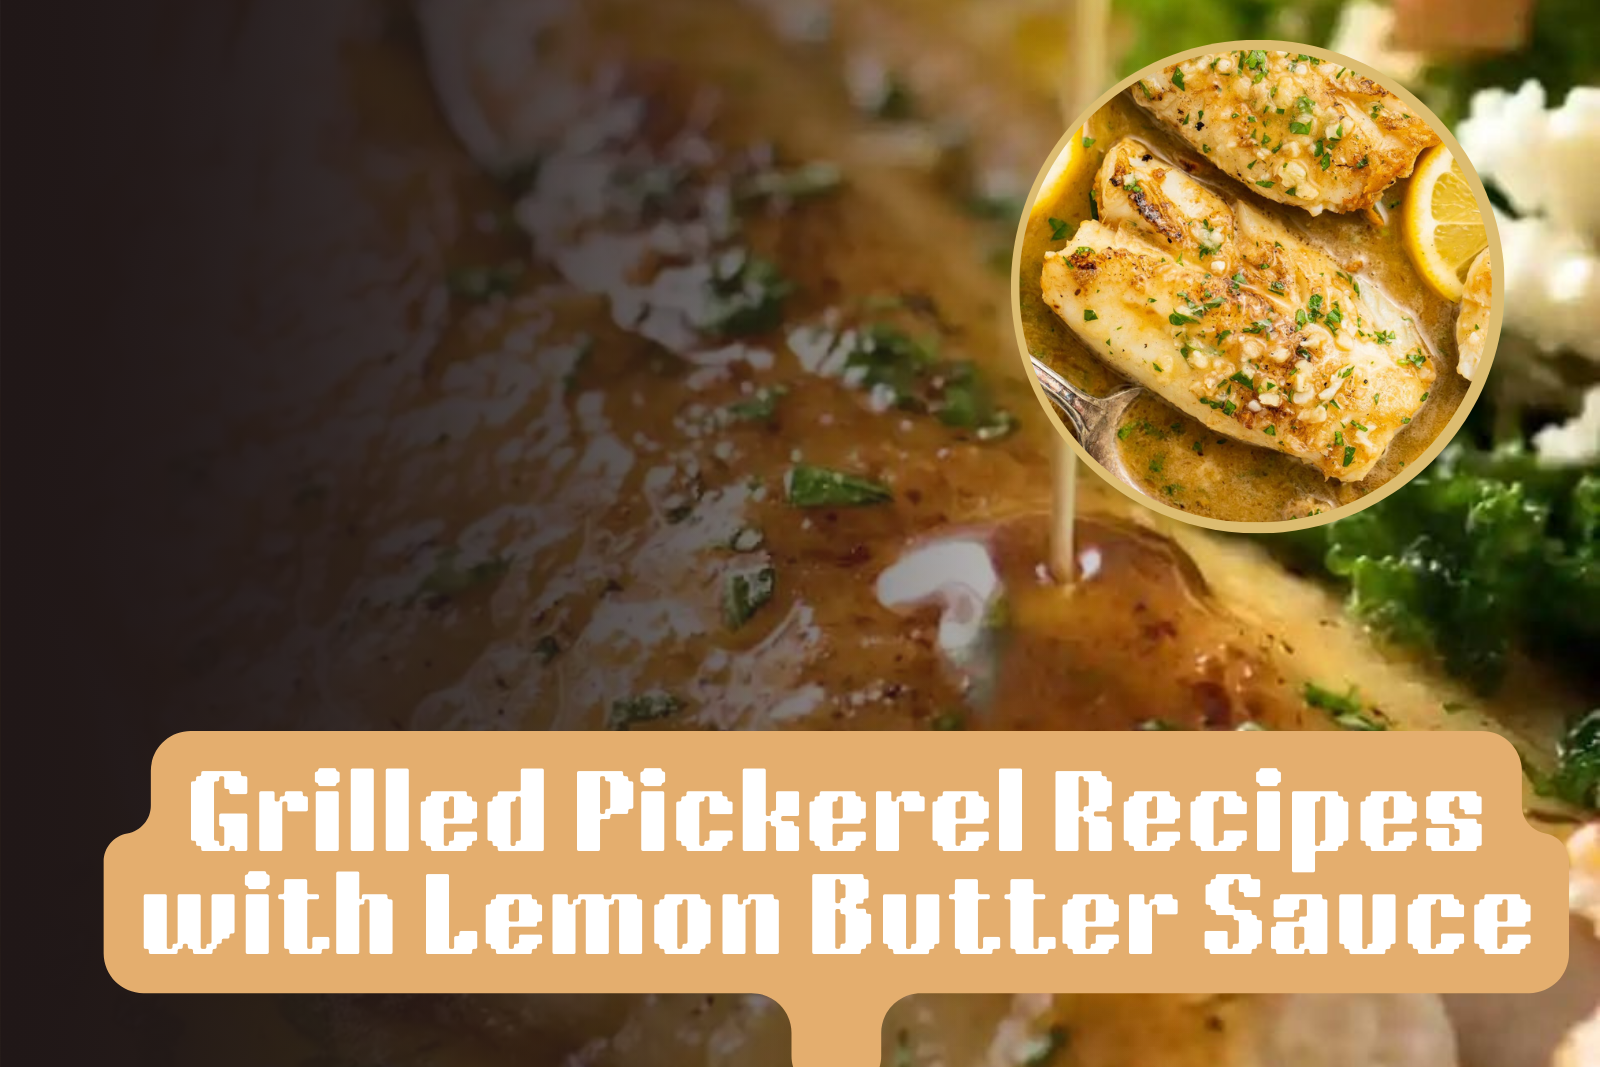 Pickerel Recipes,Grilled Pickerel with Lemon Butter Sauce